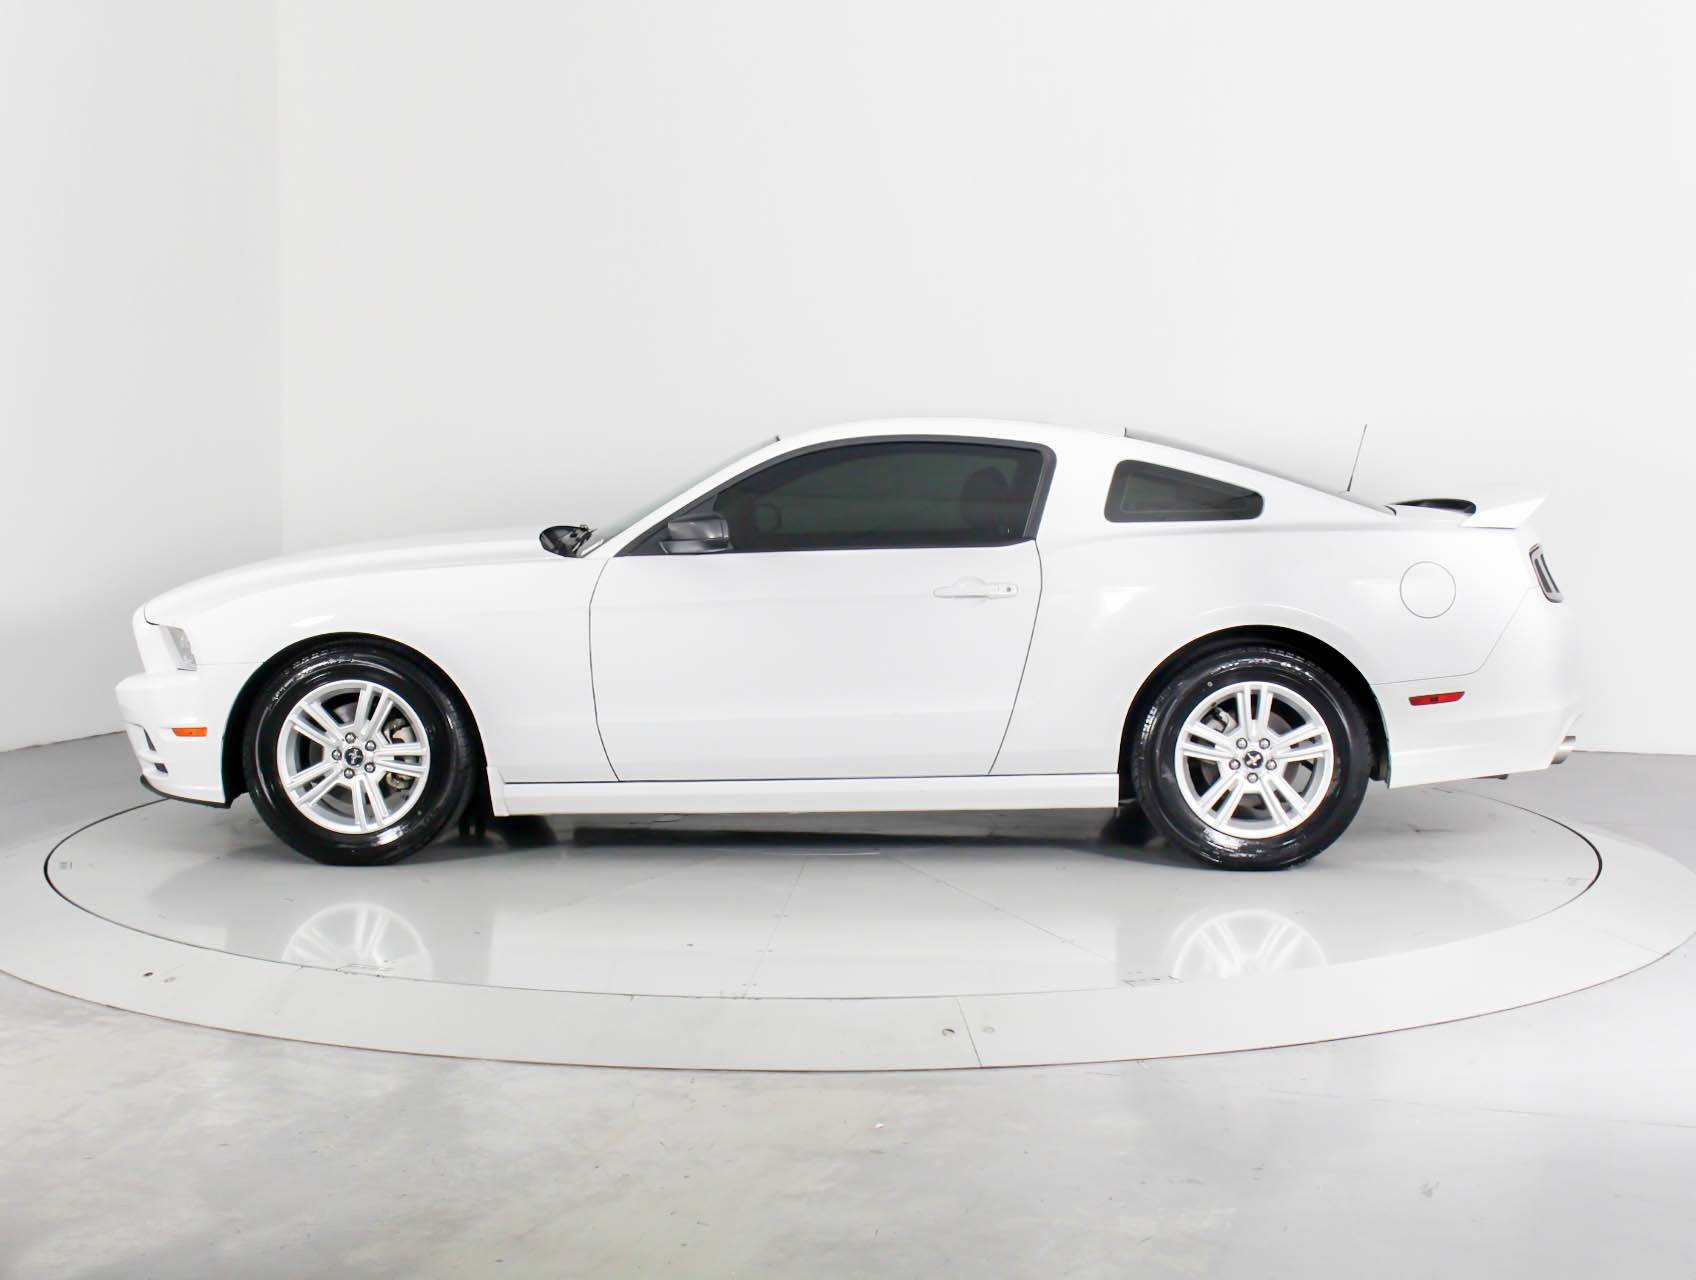 Florida Fine Cars - Used FORD MUSTANG 2014 WEST PALM V6